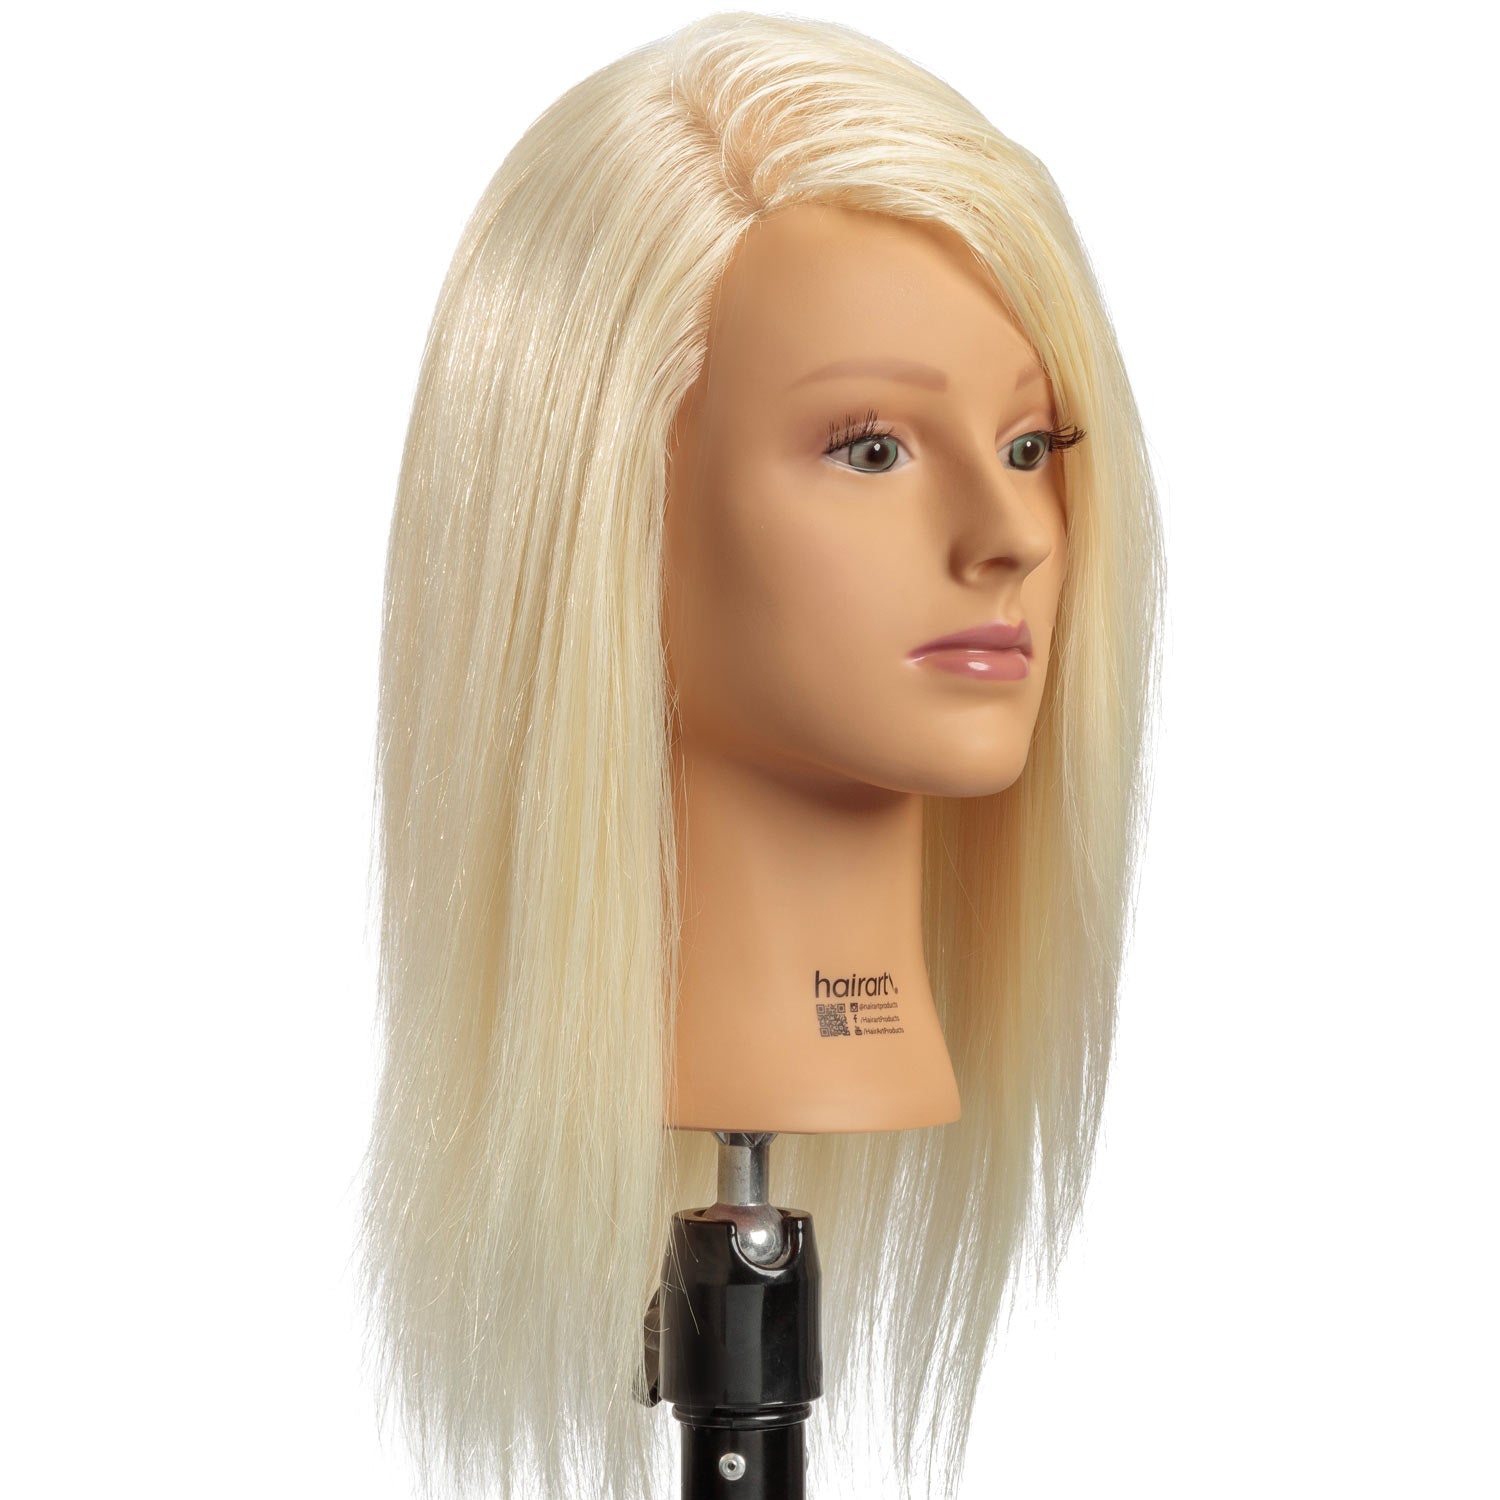 100% Human Hair Mannequins for Salons and Cosmetology Use - HairArt Tagged Mannequin  Head with Shoulder Platform - HairArt Int'l Inc.